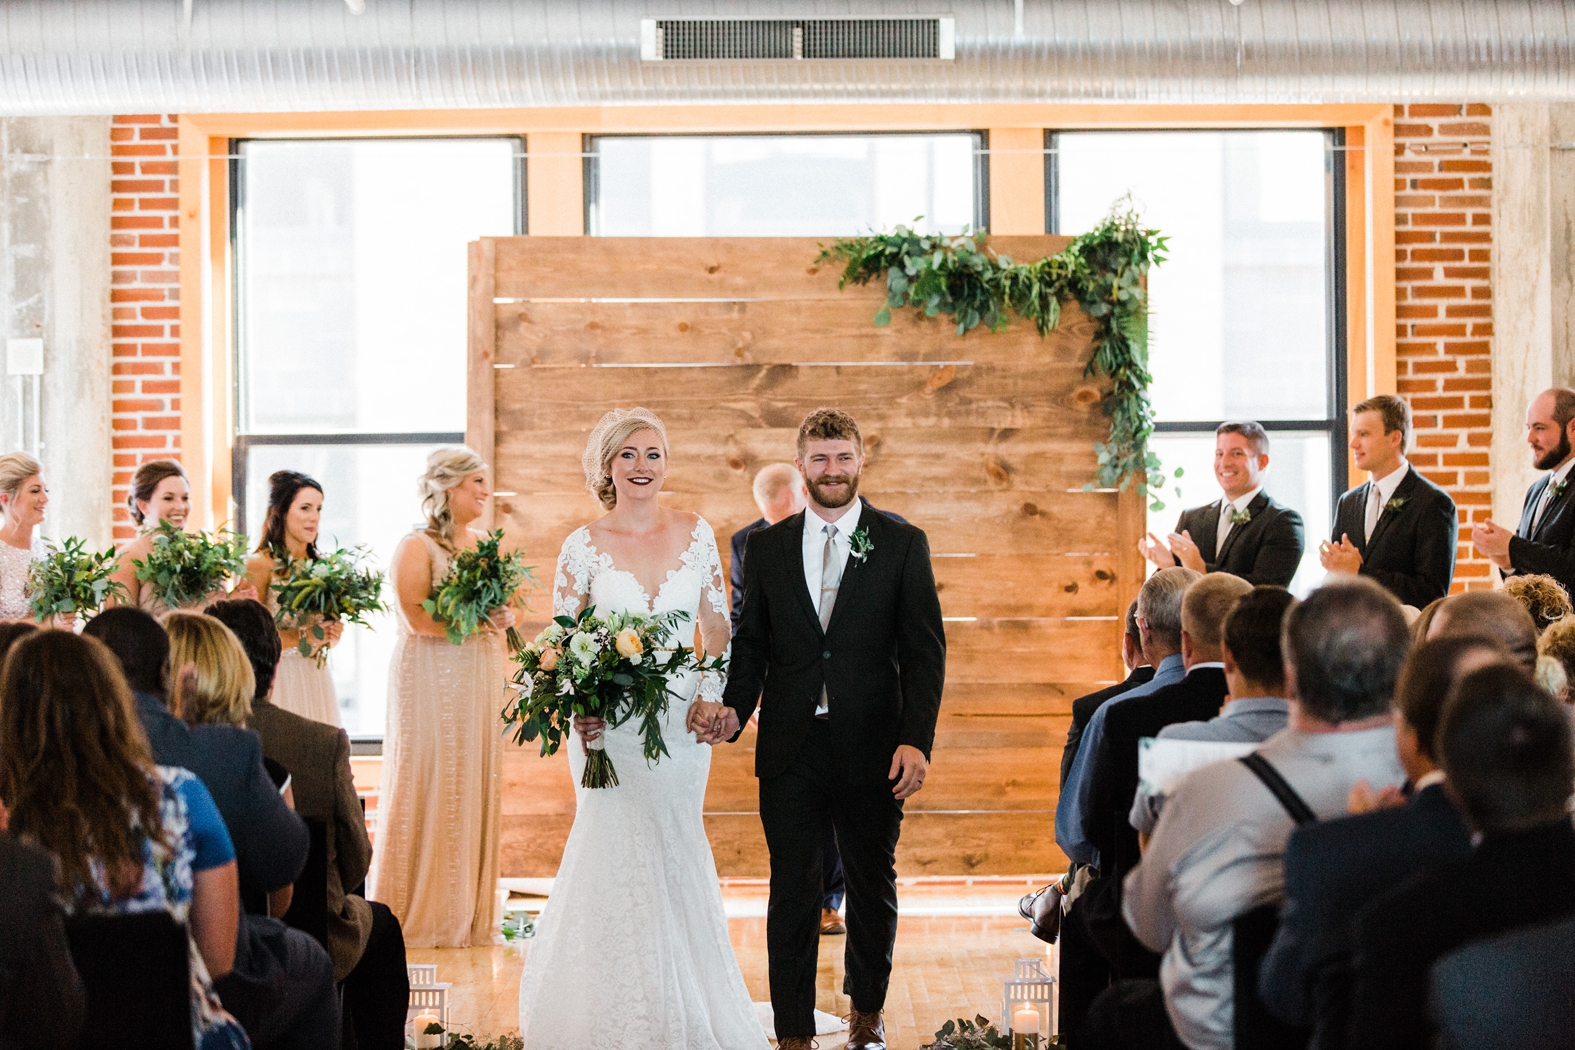 Bride and groom exit wedding ceremony at Windows on Washington. Wood backdrop with greenery. Bride in lace long sleeve dress with birdcage veil; groom in olive green suit.